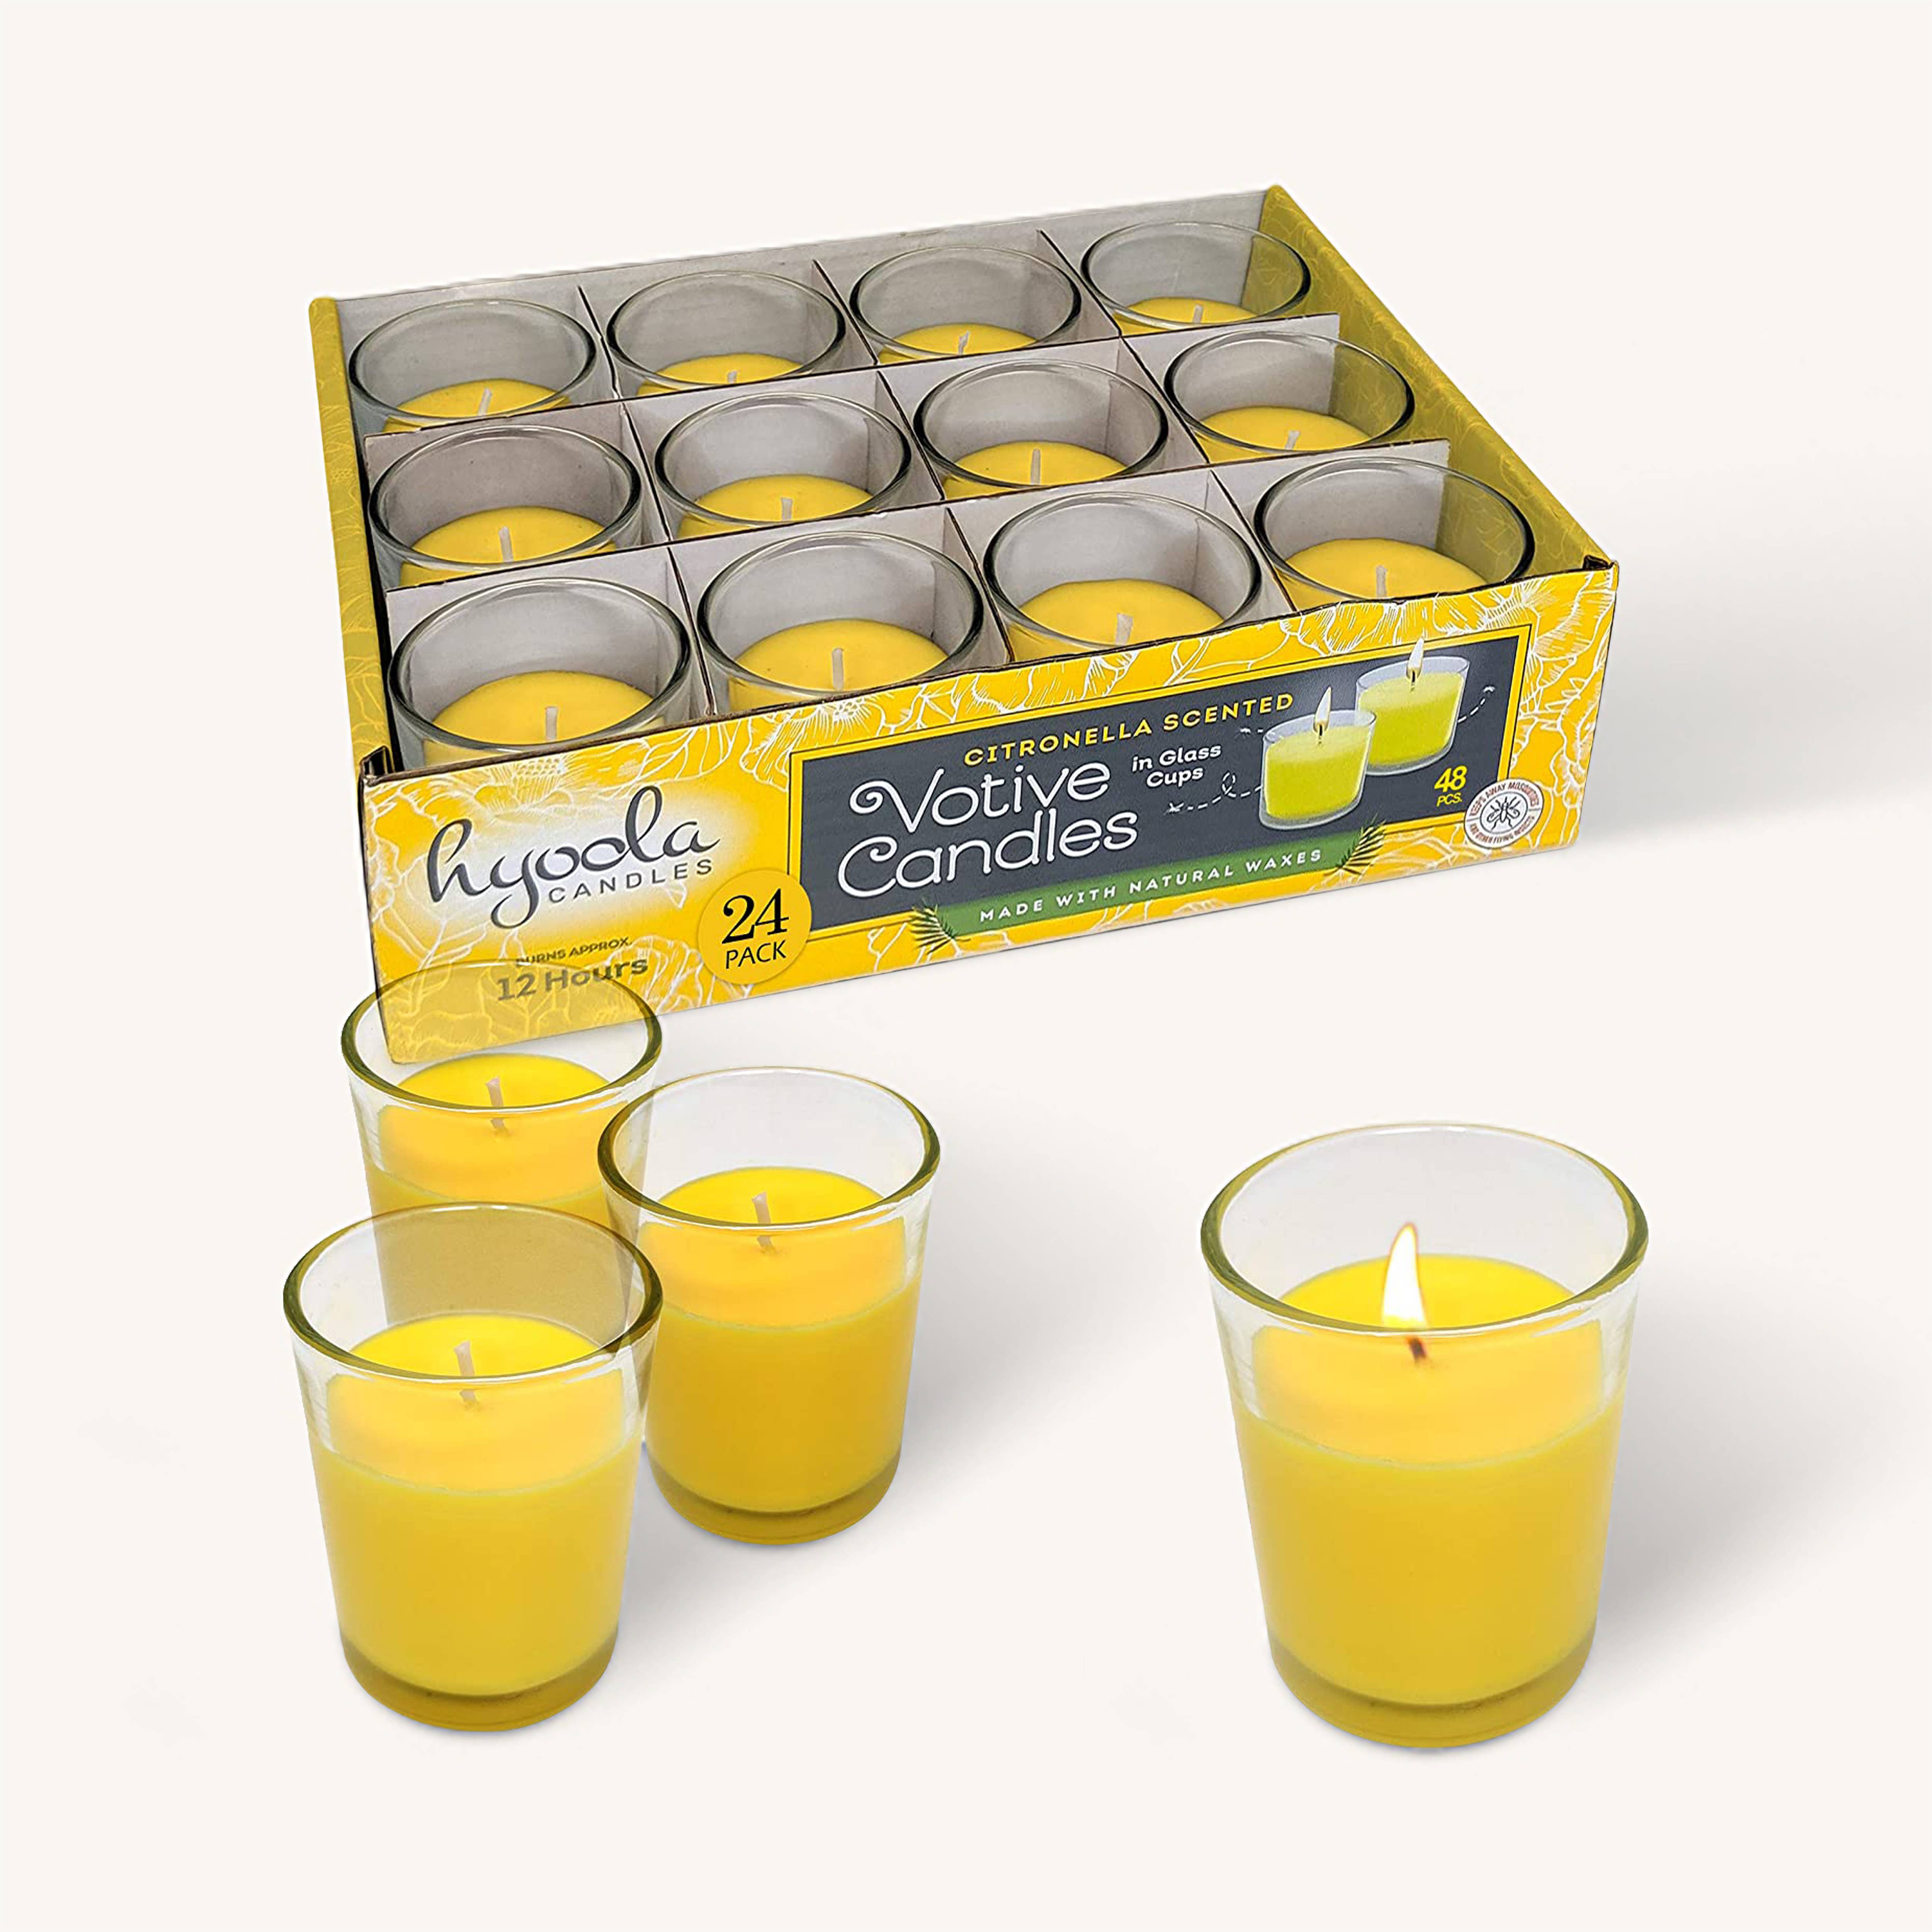 Citronella Votive Candle in Glass Cups - 12 Hours - 12 Pack